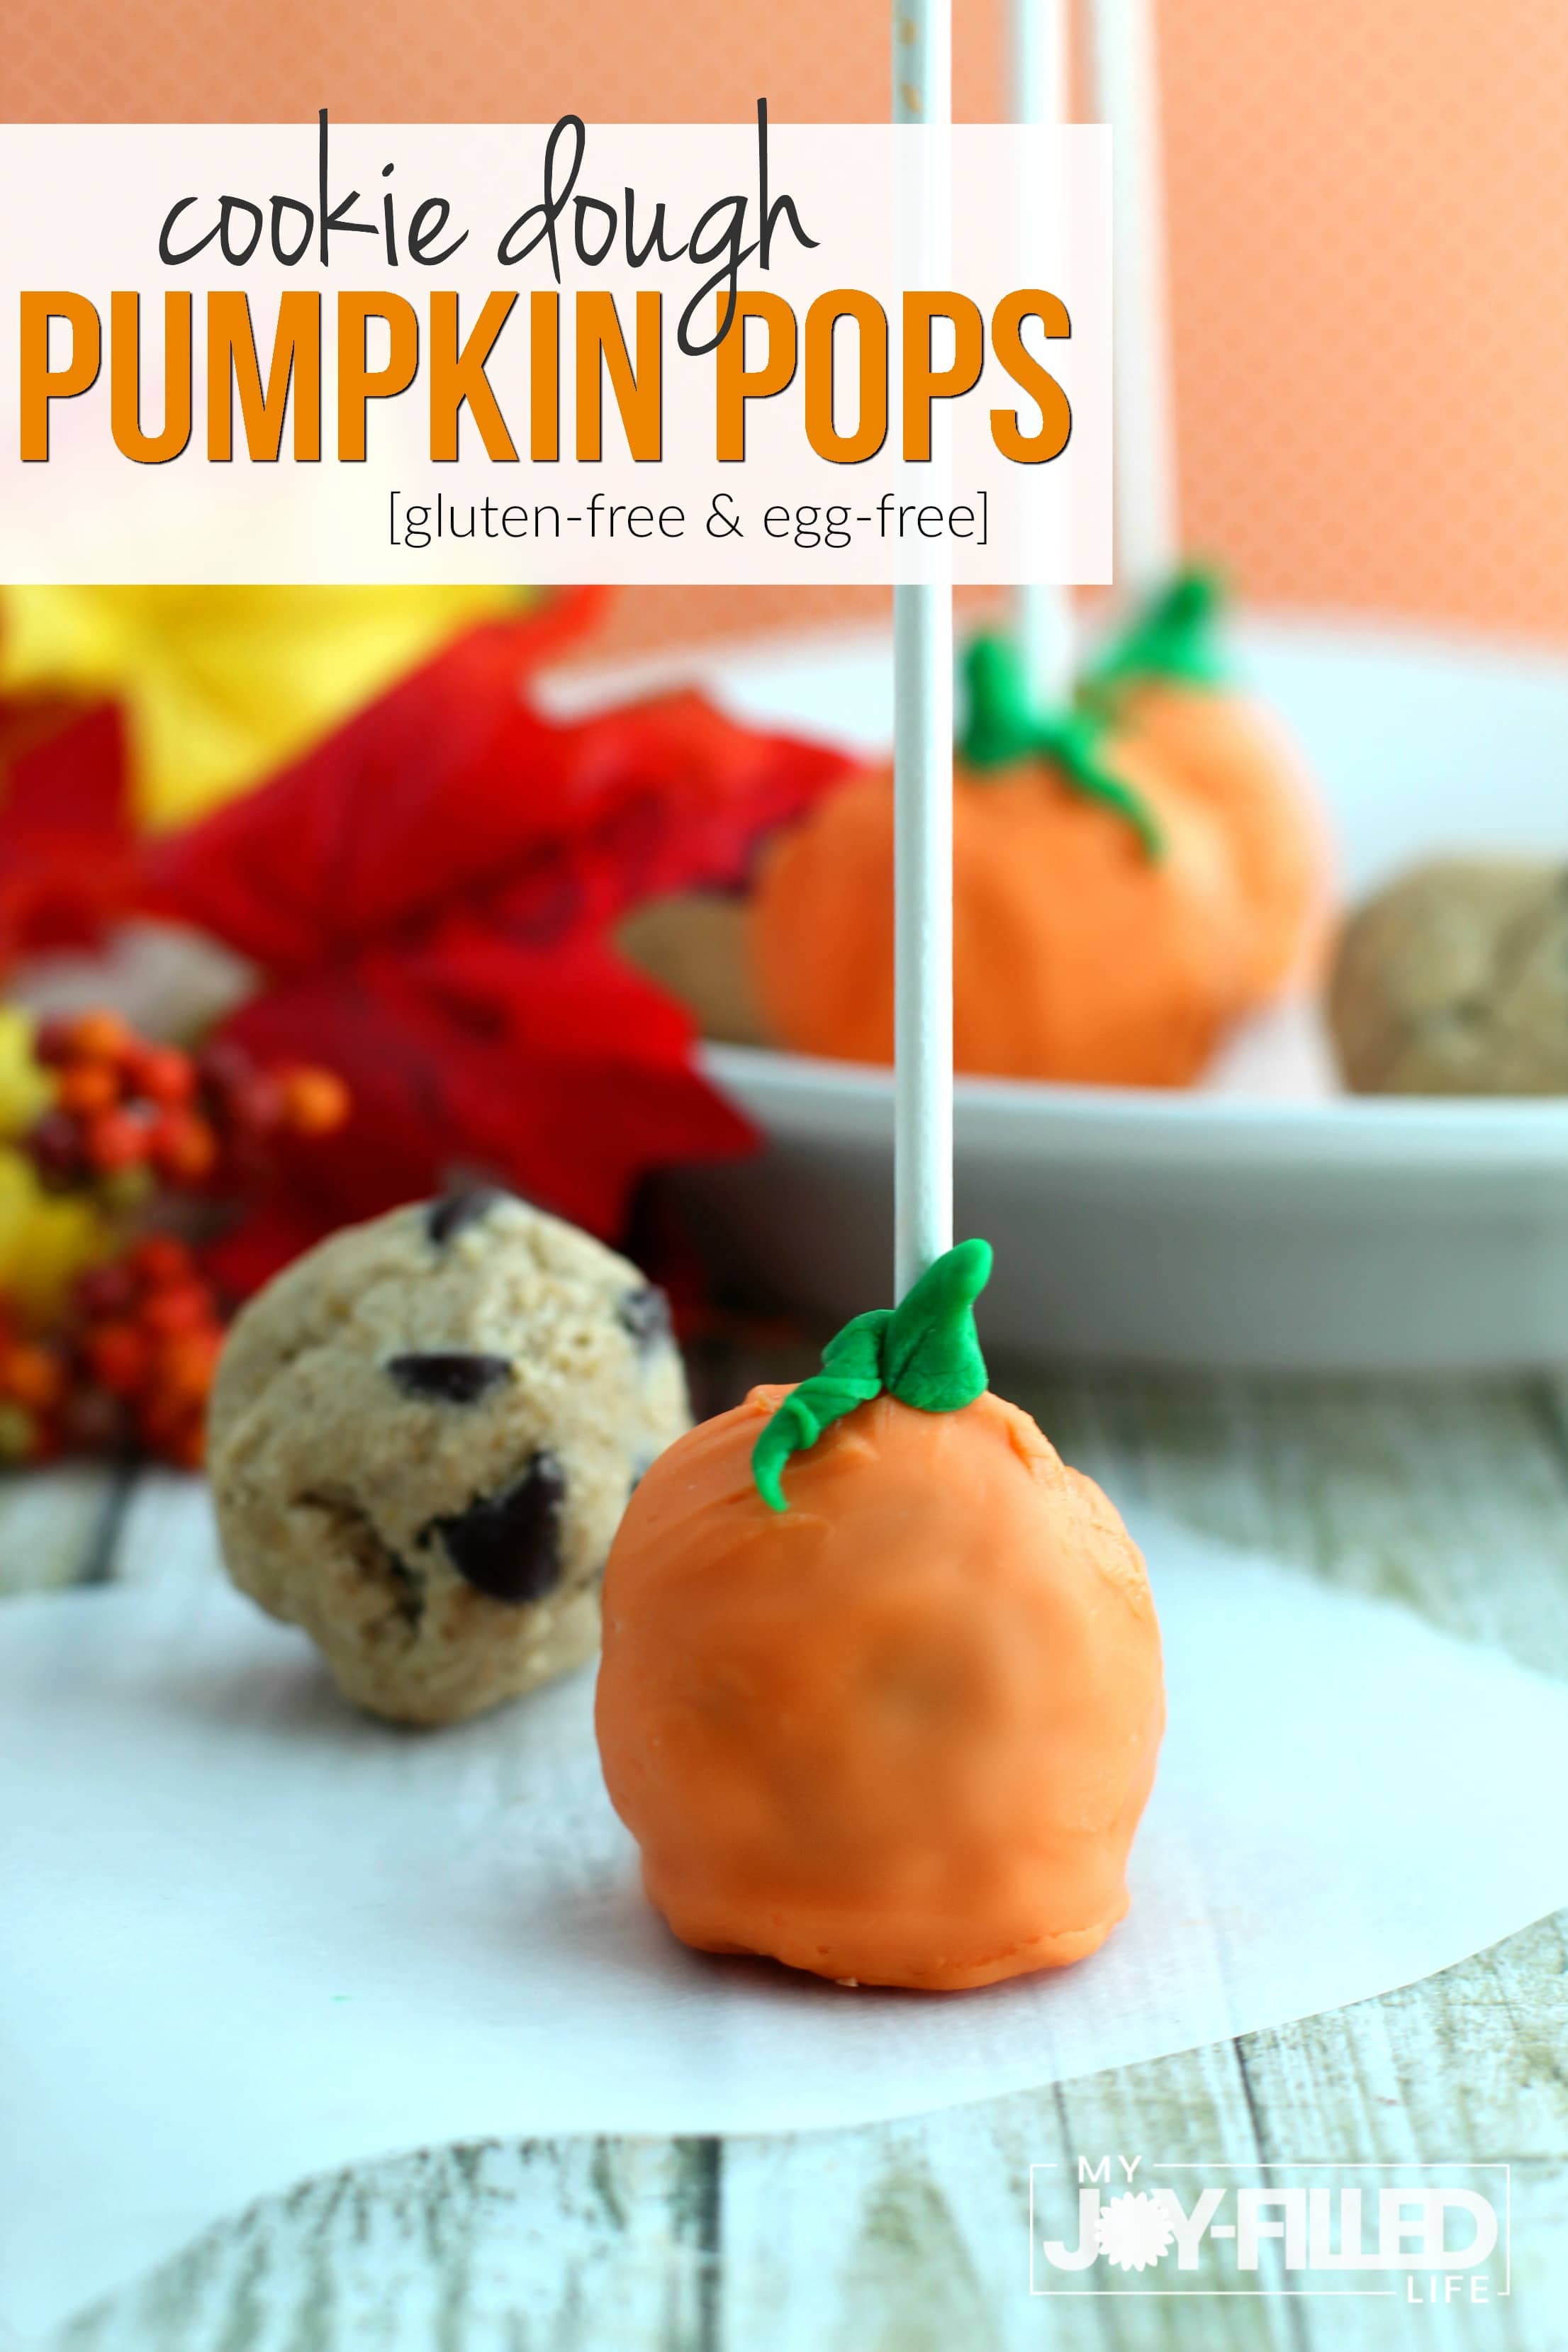 These cookie dough pumpkin pops are the perfect gluten-free, egg-free treat for your next fall or harvest party. Food is better on a stick. #cookiedough #glutenfree #pumpkinpops #falltreat #harvestparty